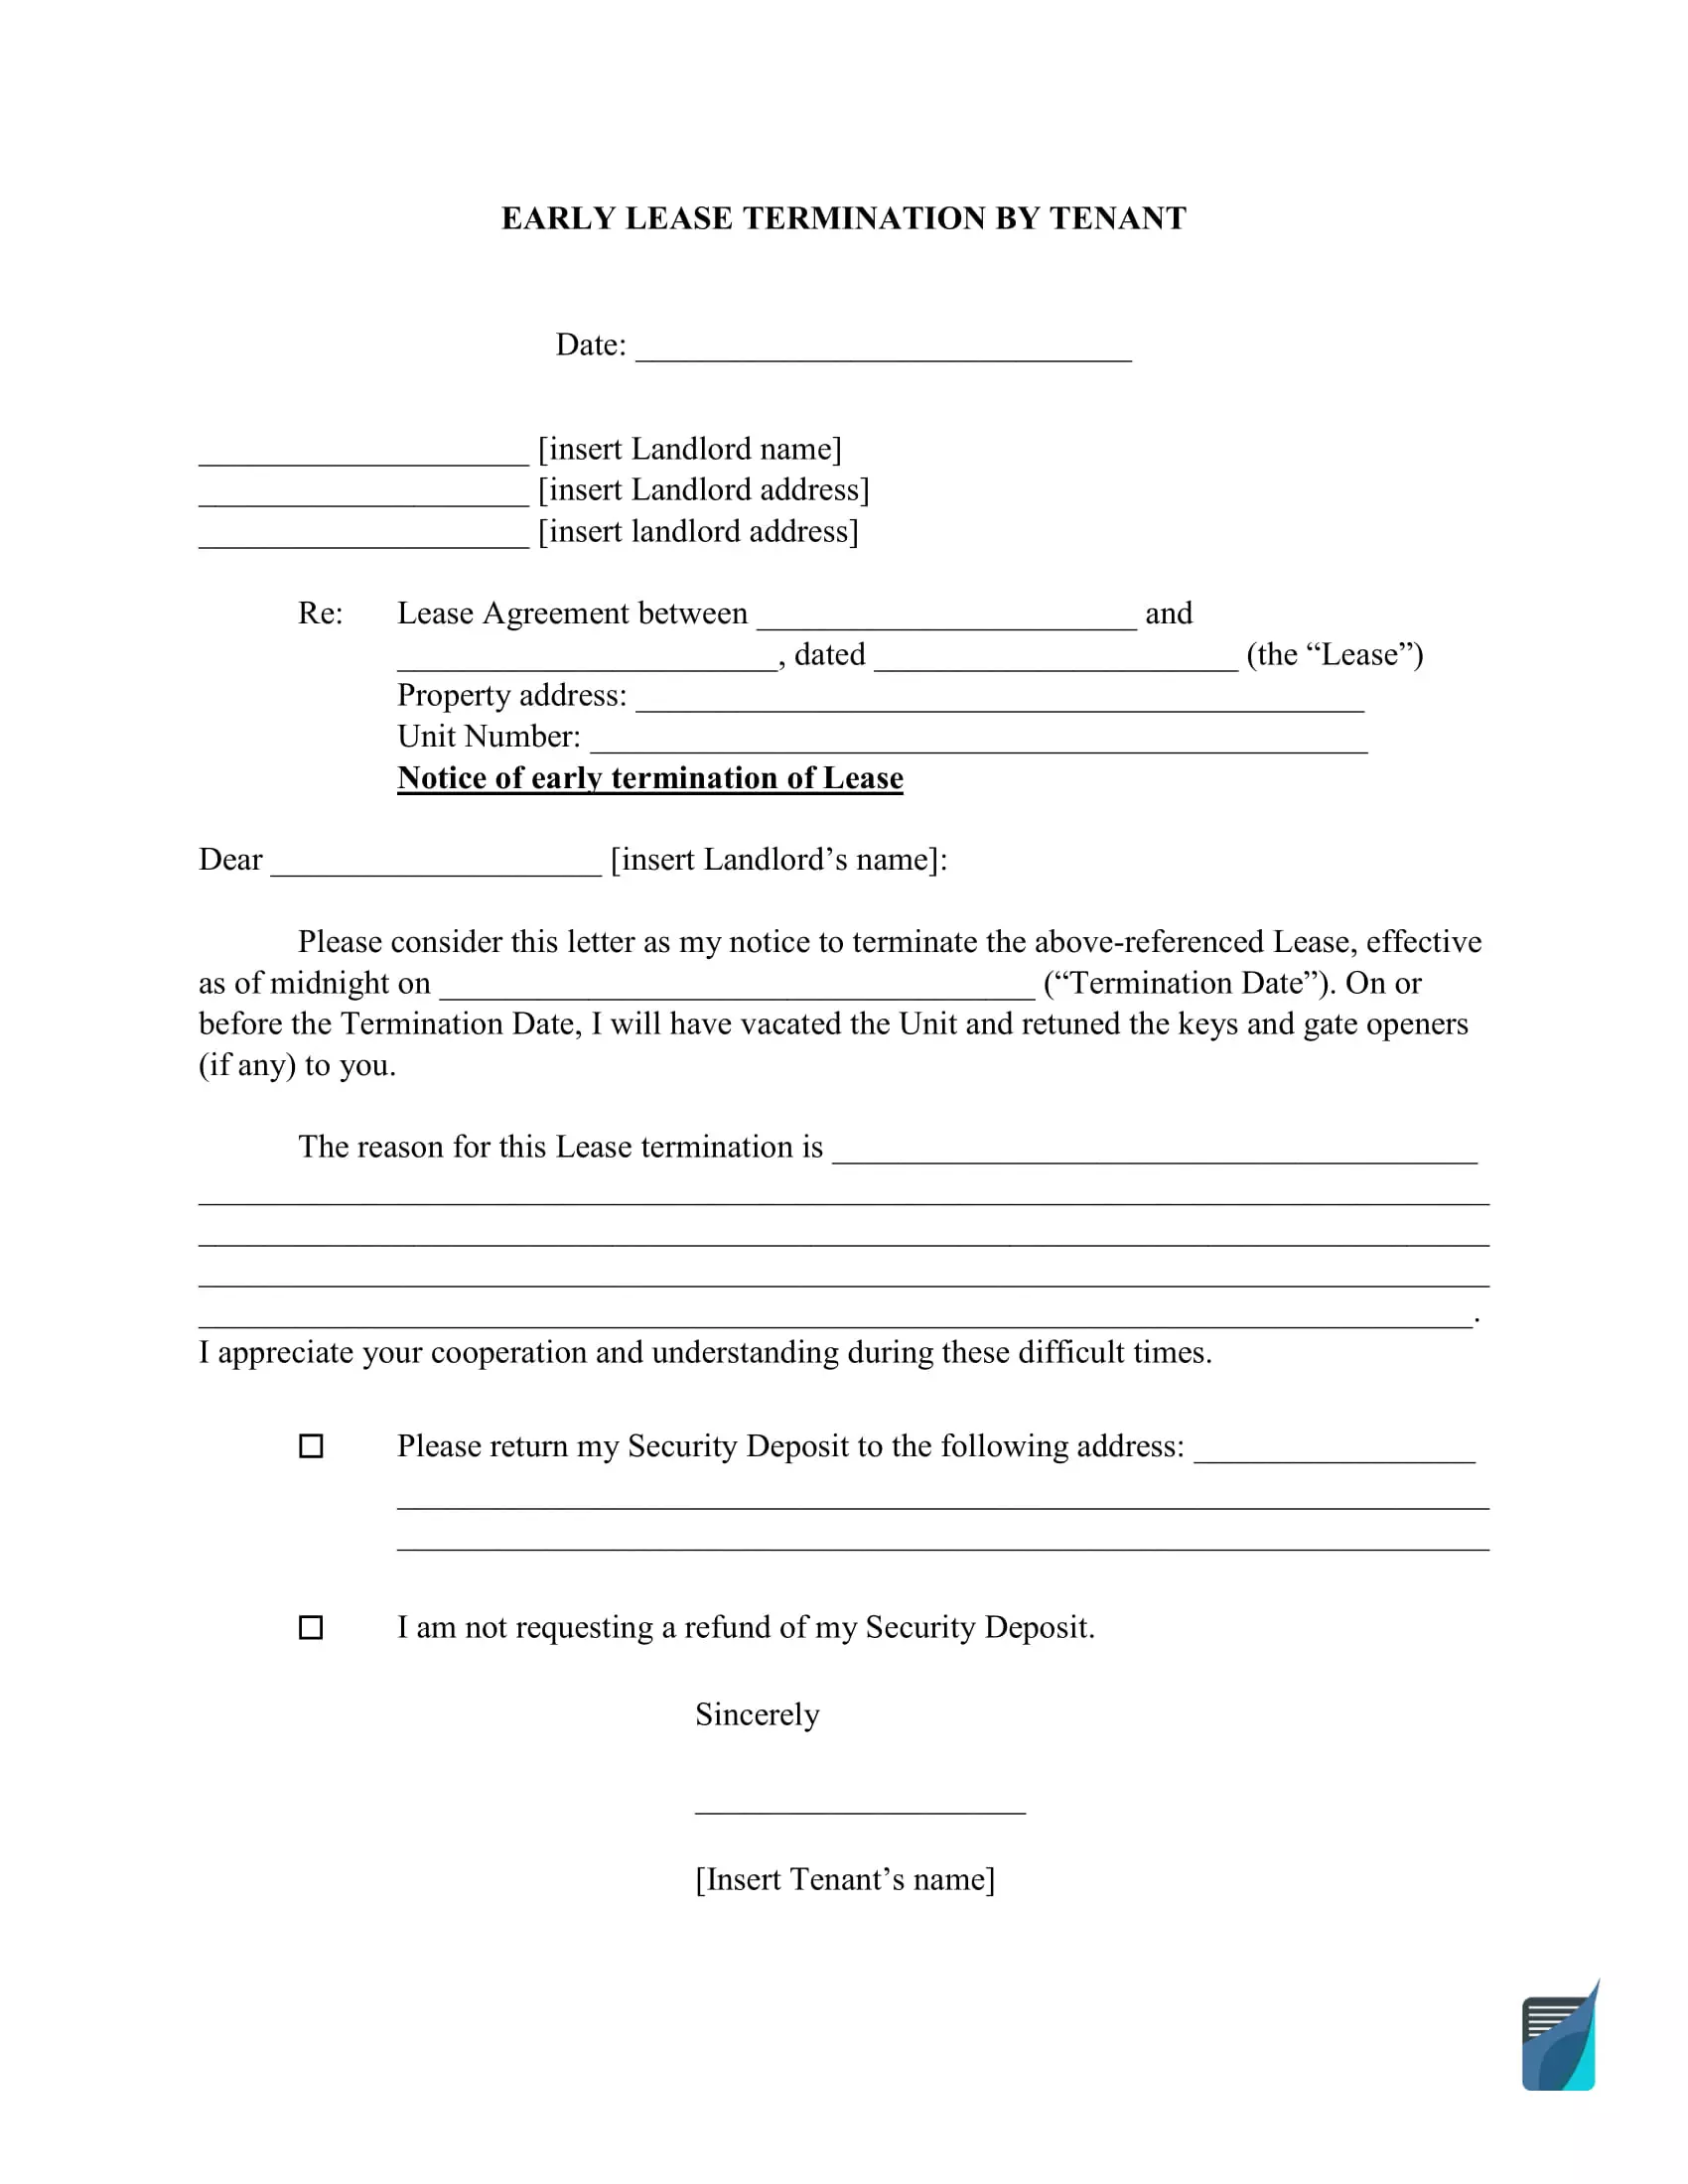 Free Early Lease Termination Letter Form  FormsPal